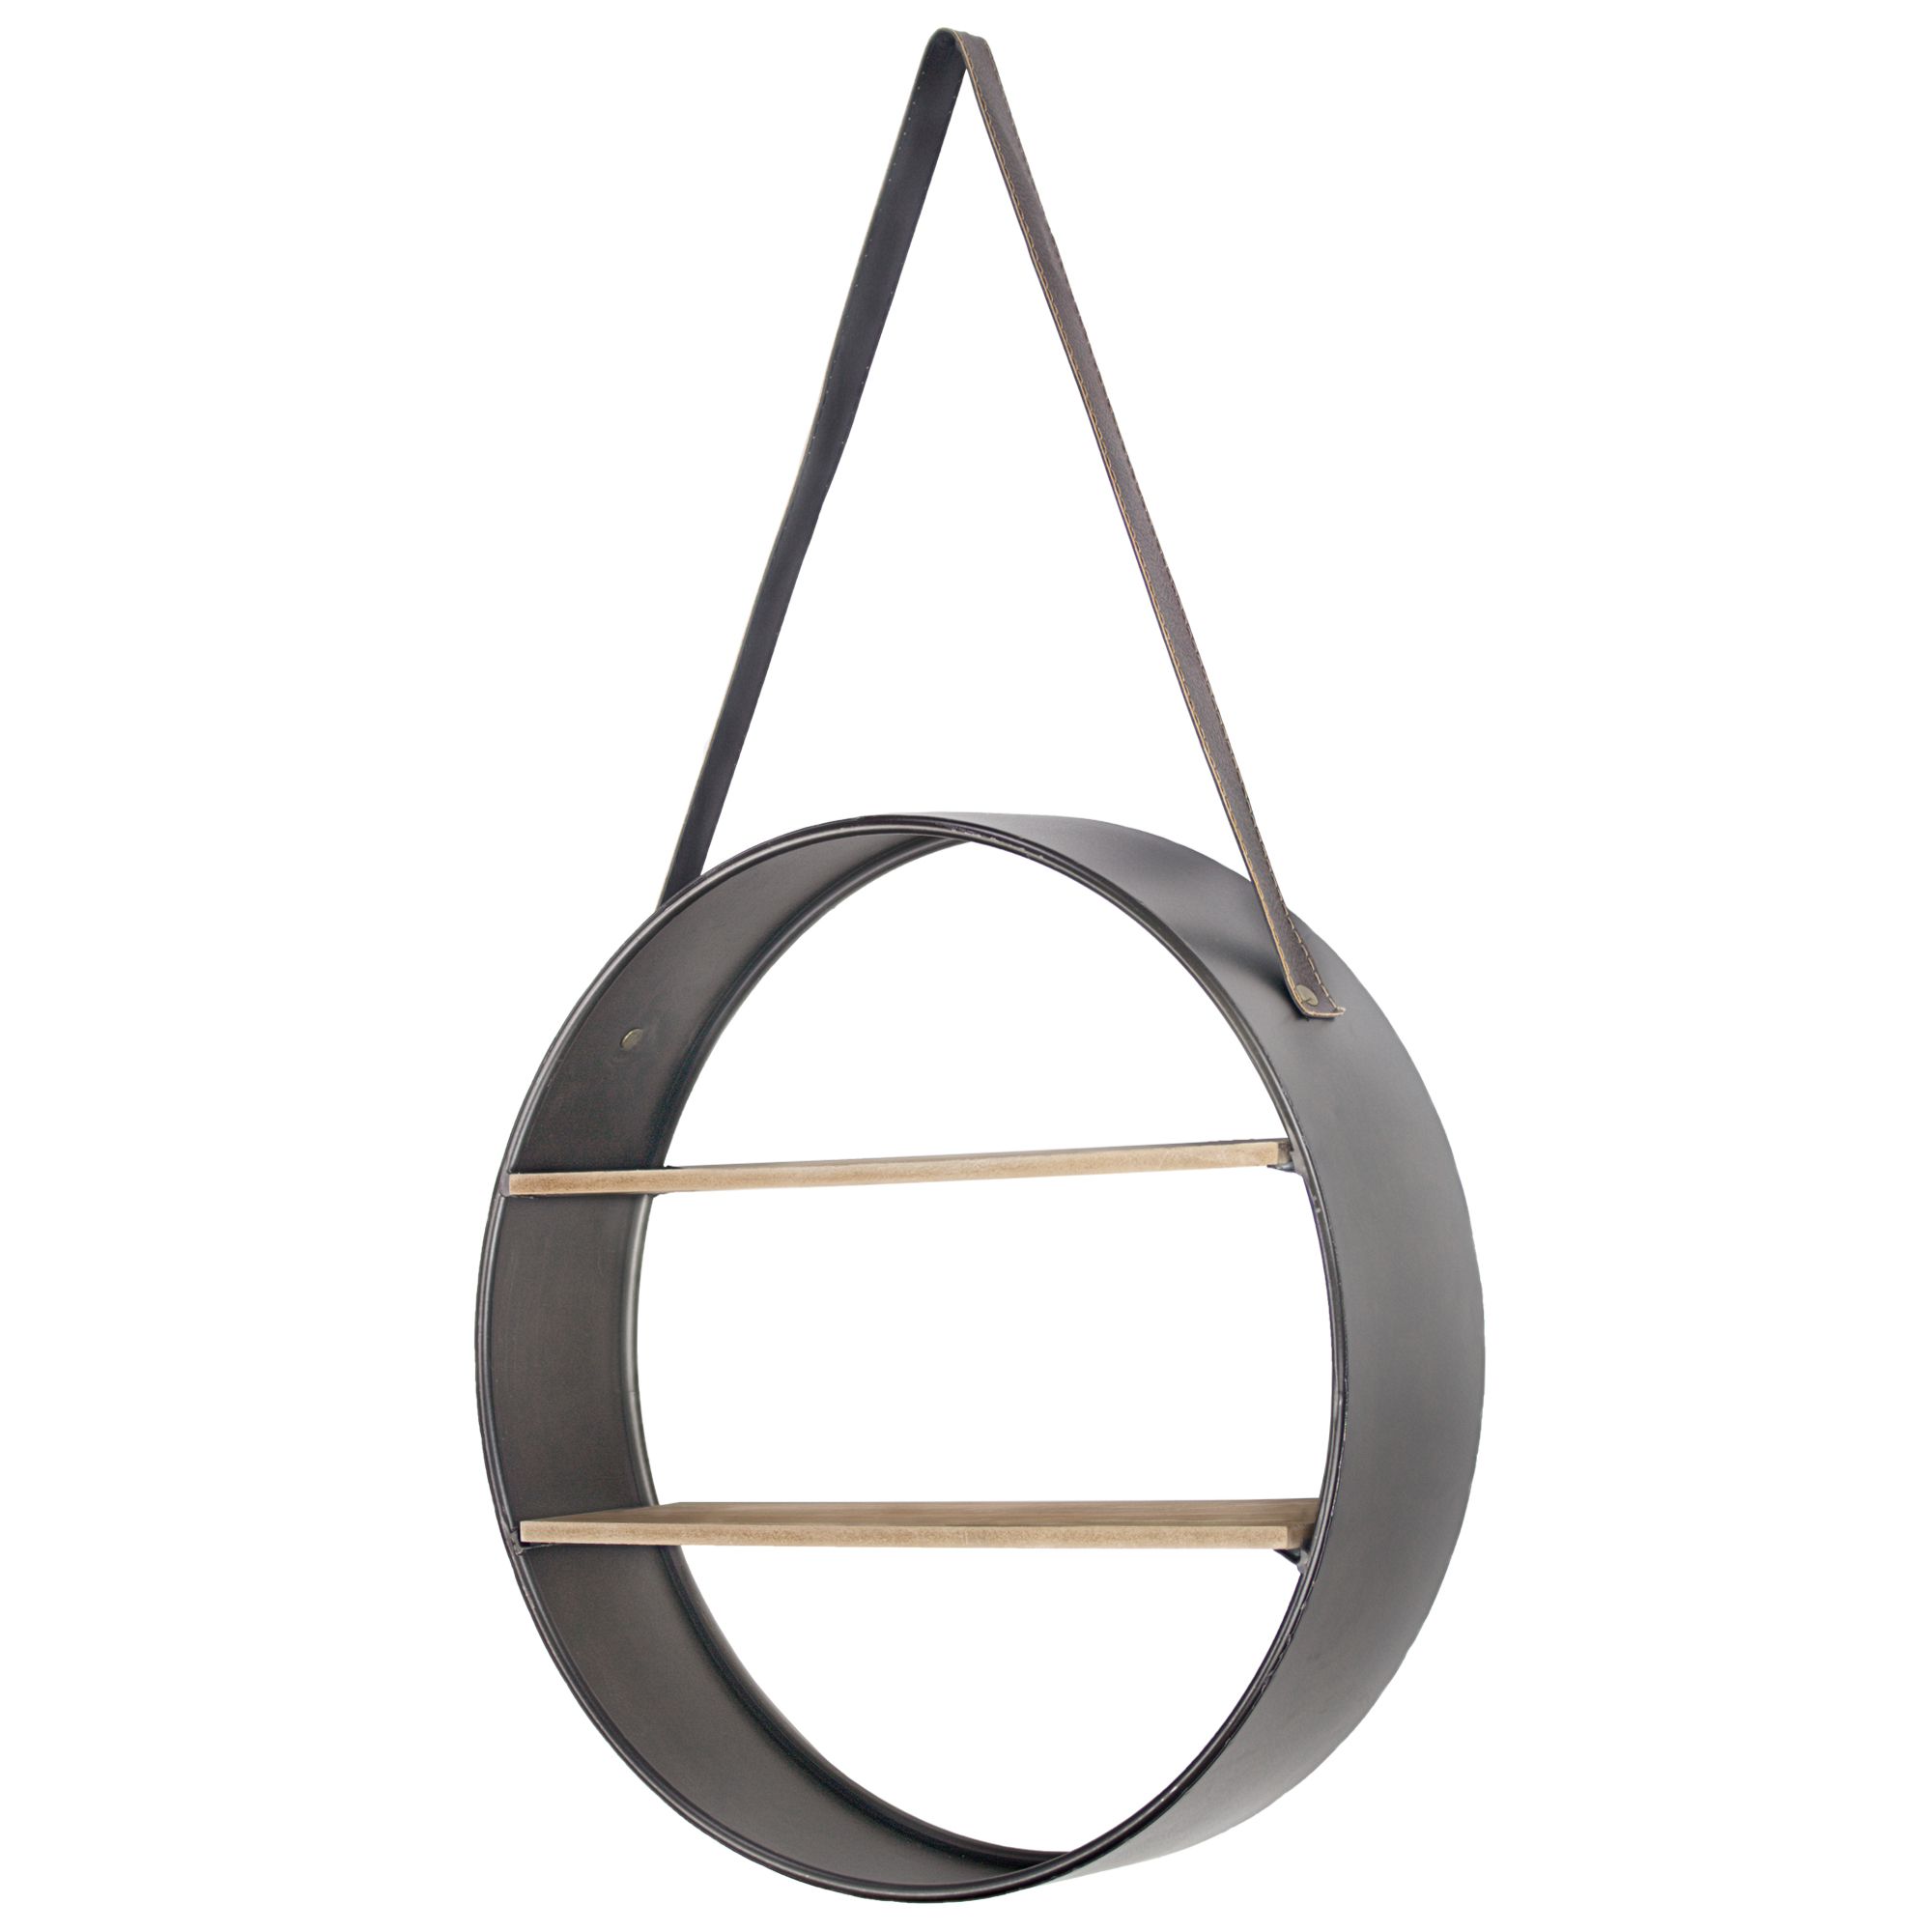 American Art Decor Metal and Wood Round Hanging Wall Shelf with Strap (33" x 19) - image 1 of 8